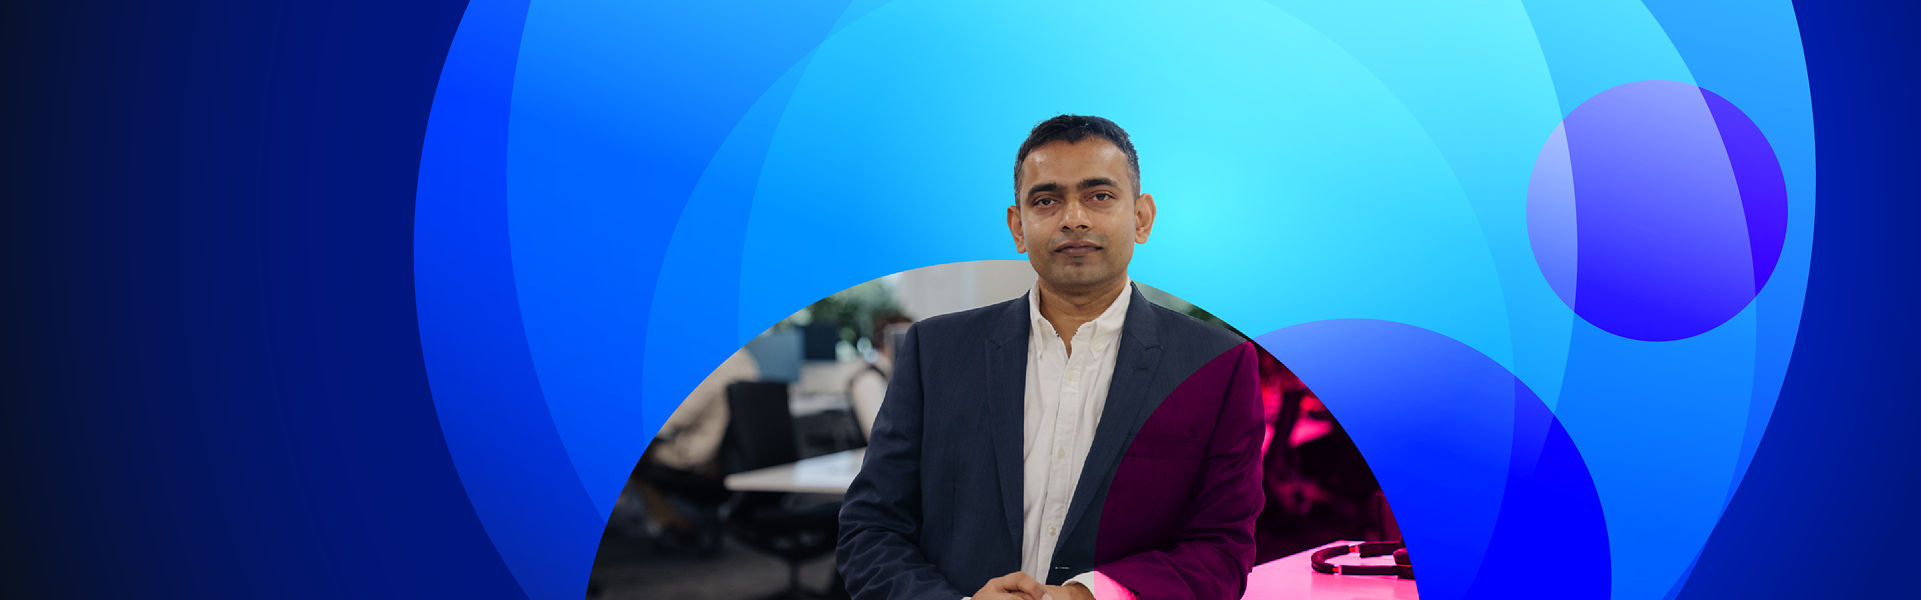 Anish Sharma mid distance profile shot with office background cropped for Datacom Discover banner with colourful lens inspired blue background design and transparent pink circles overlaid